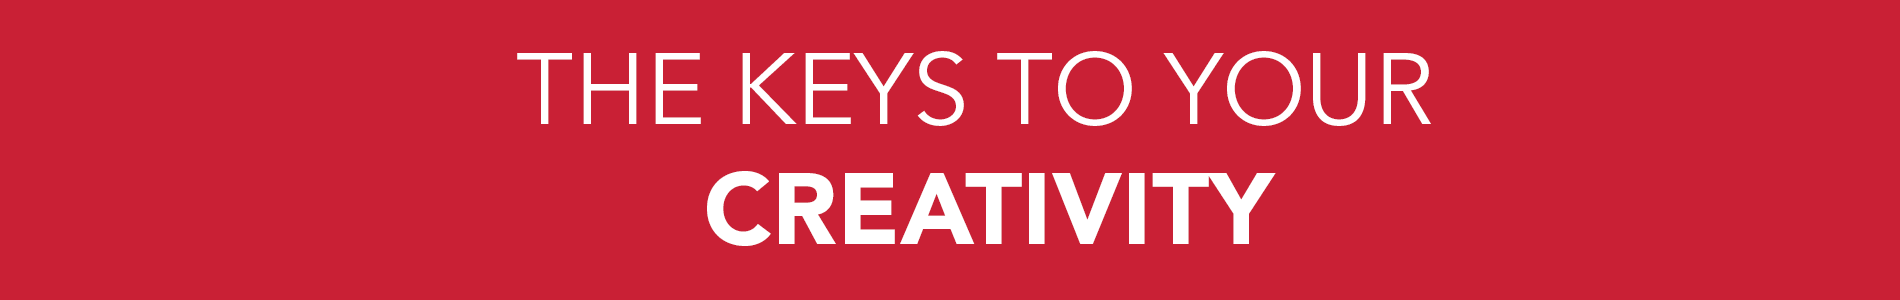 The Keys to Your Creativity